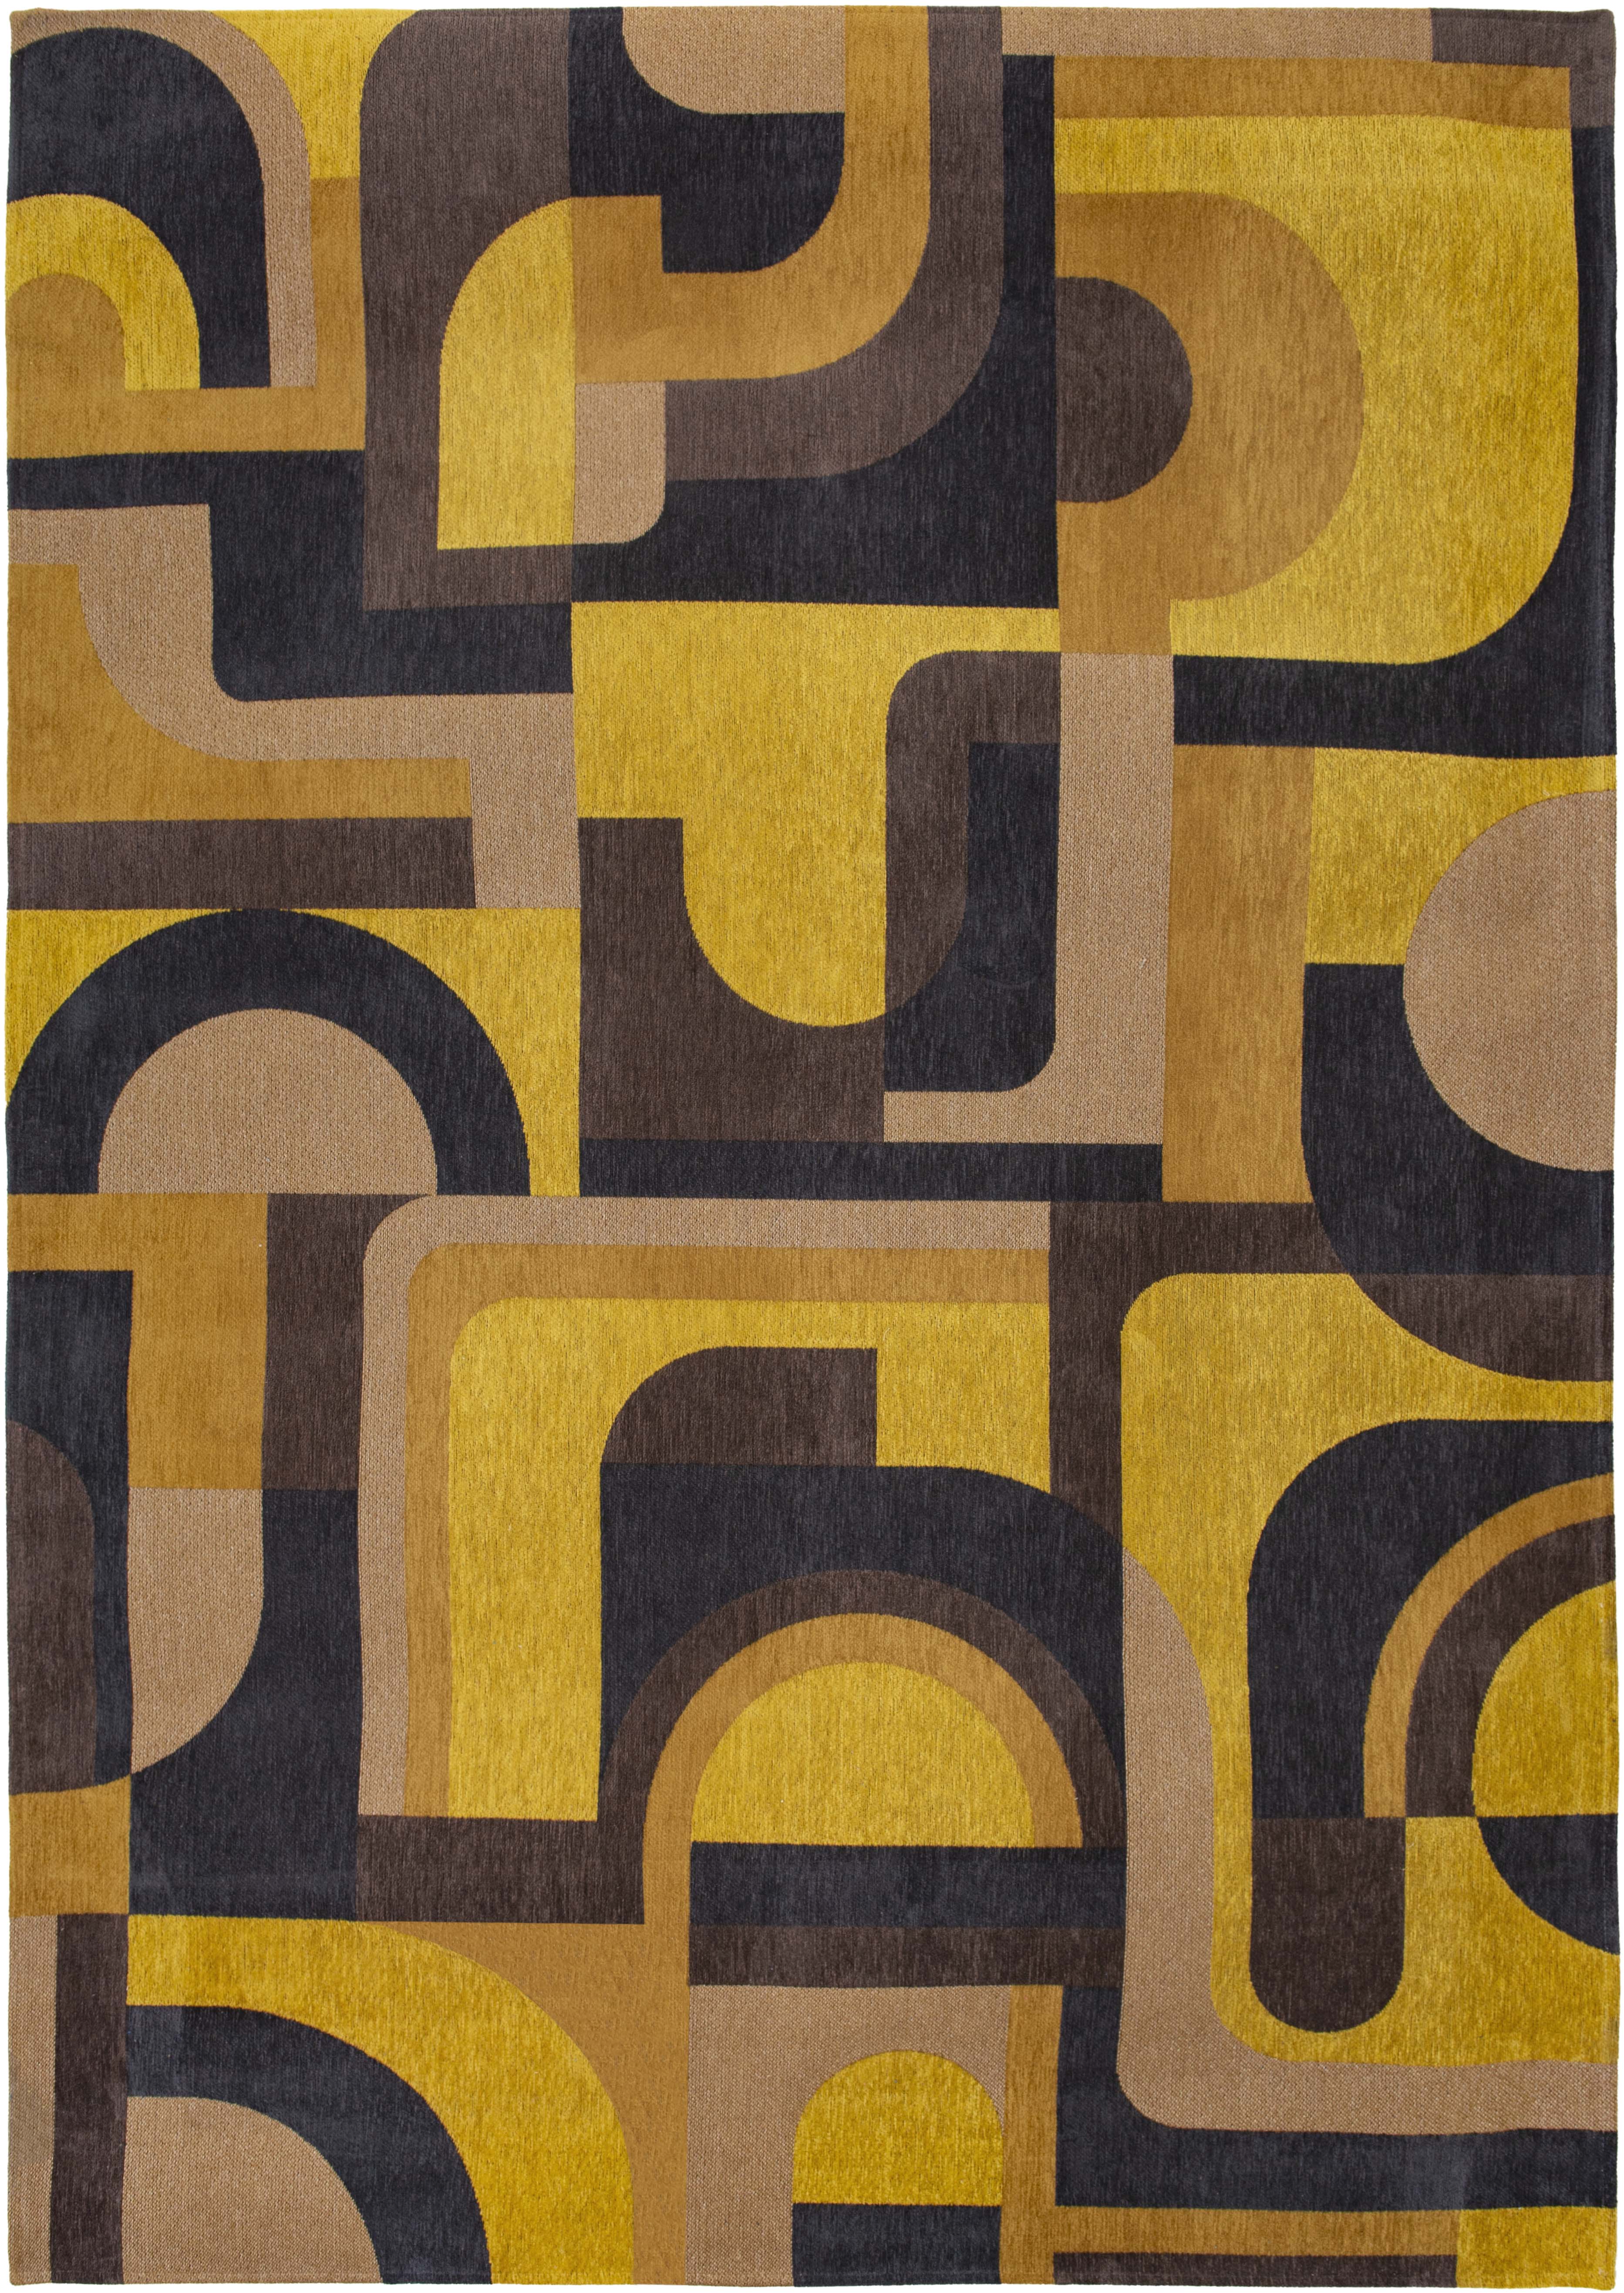 Flatweave area runner rug with retro pattern in yellow, navy and brown